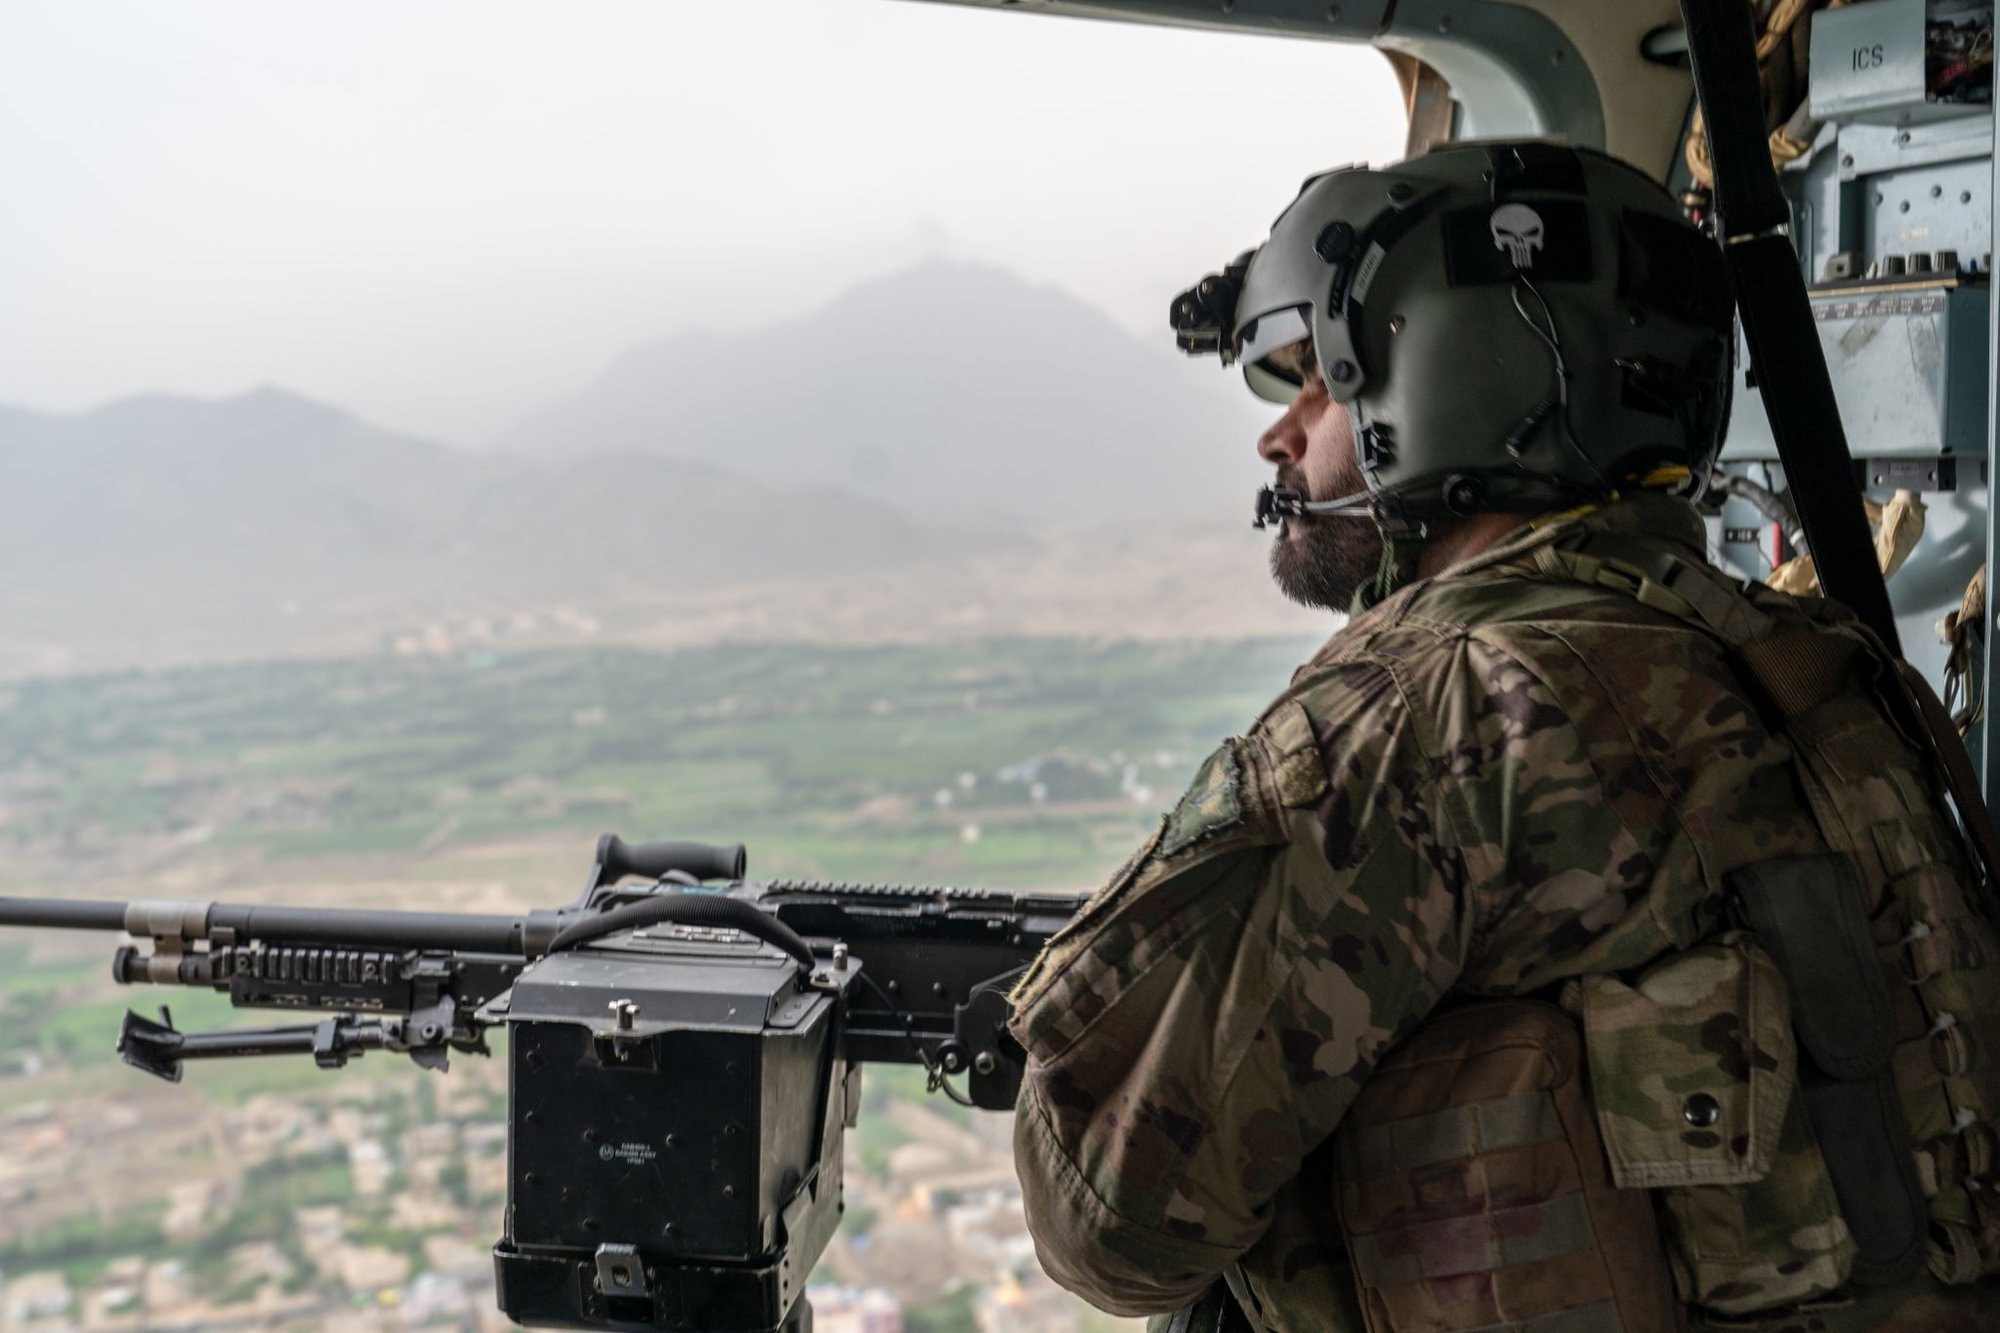 A crew chief for the Afghan Special Mission Wing scans the city of Kabul during a mission in 2018. Photo by Marty Skovlund Jr./Coffee or Die Magazine.